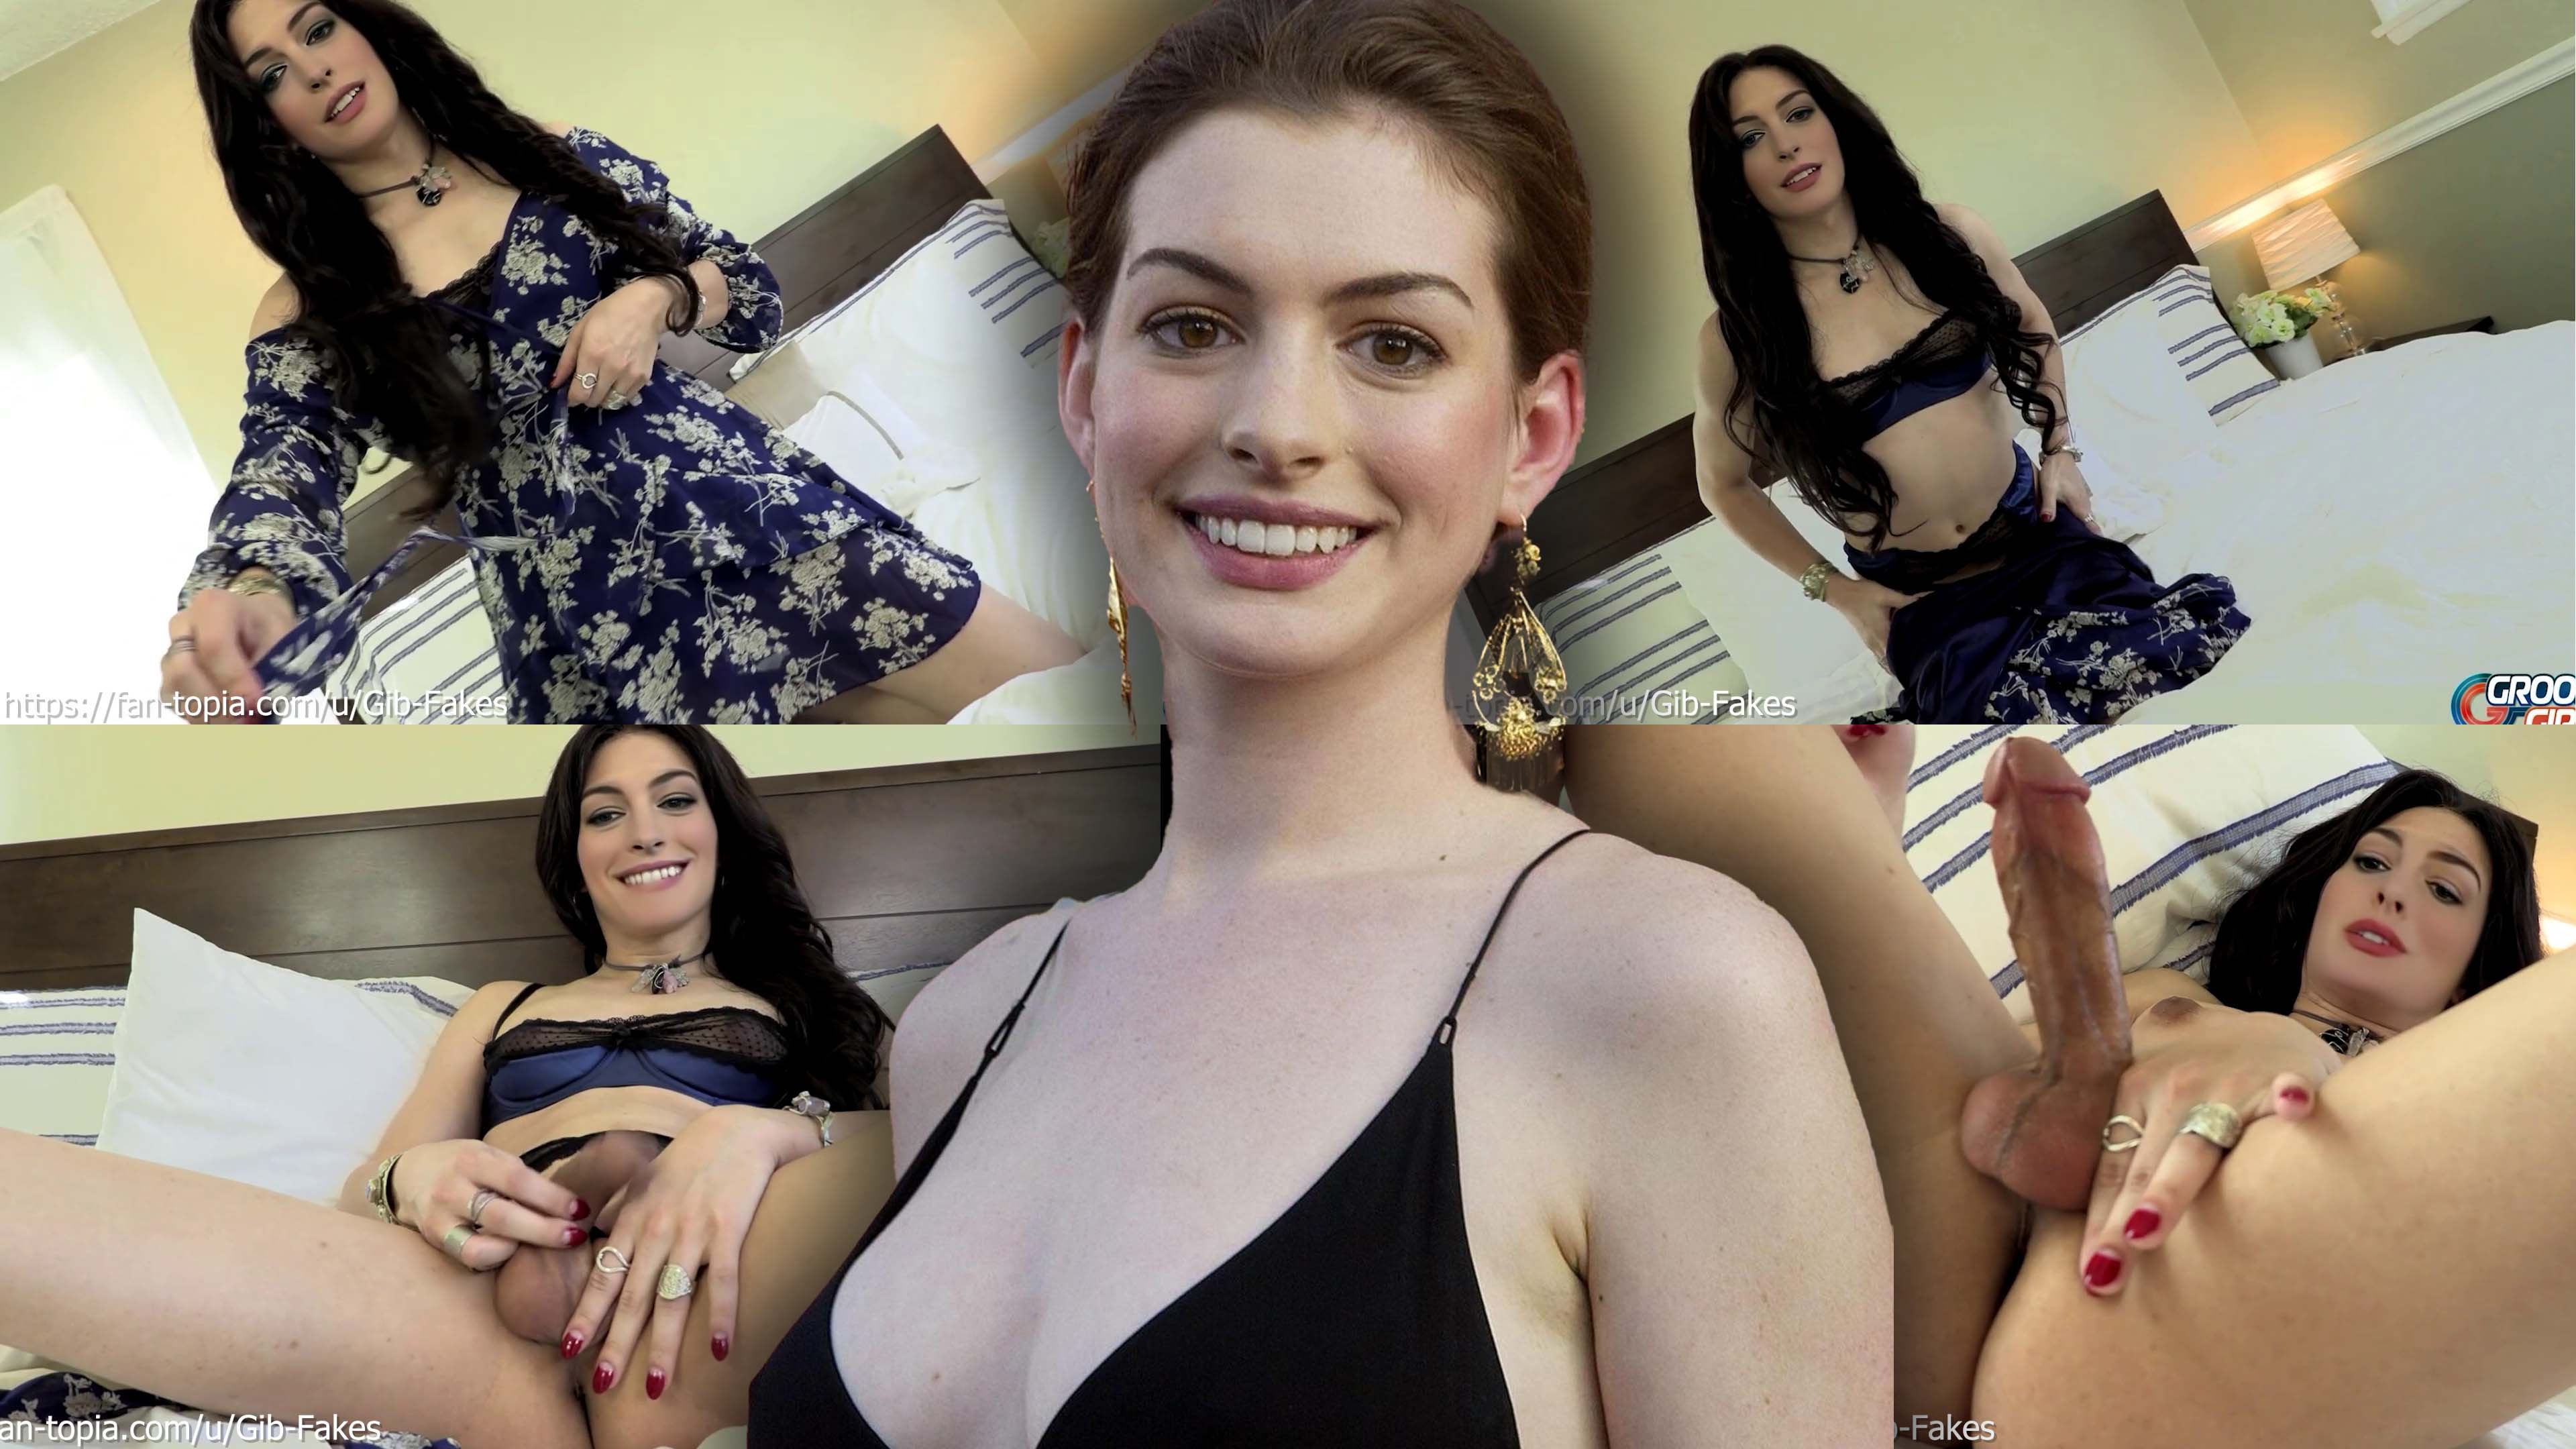 Anne Hathaway Wants You to Join Her on the Bed for a Wank (trans)